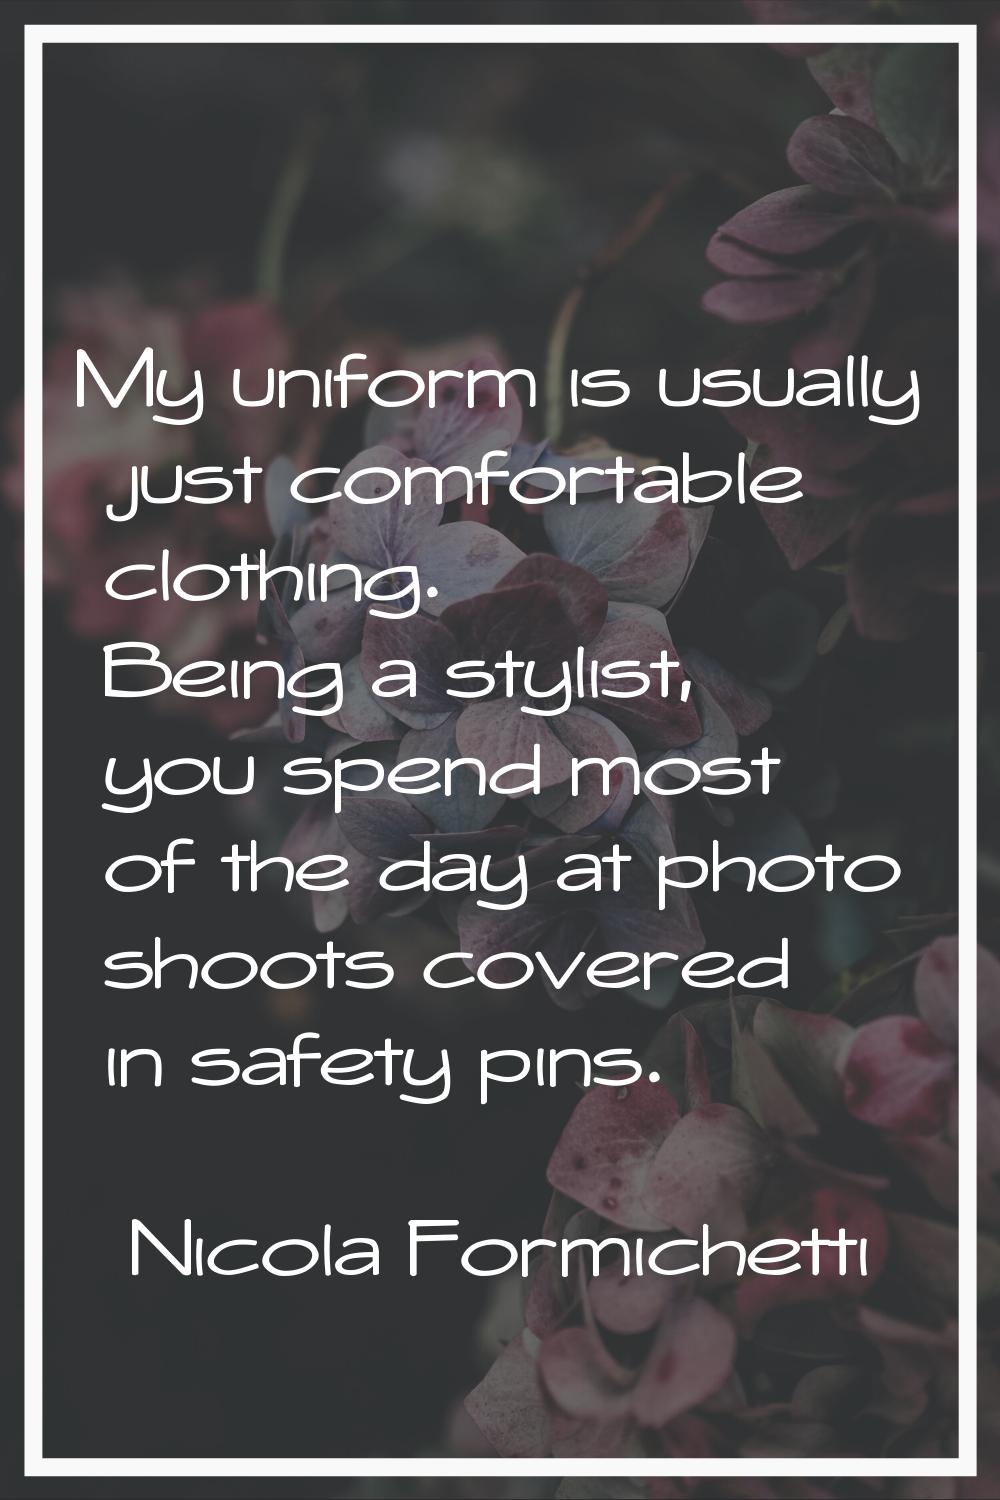 My uniform is usually just comfortable clothing. Being a stylist, you spend most of the day at phot